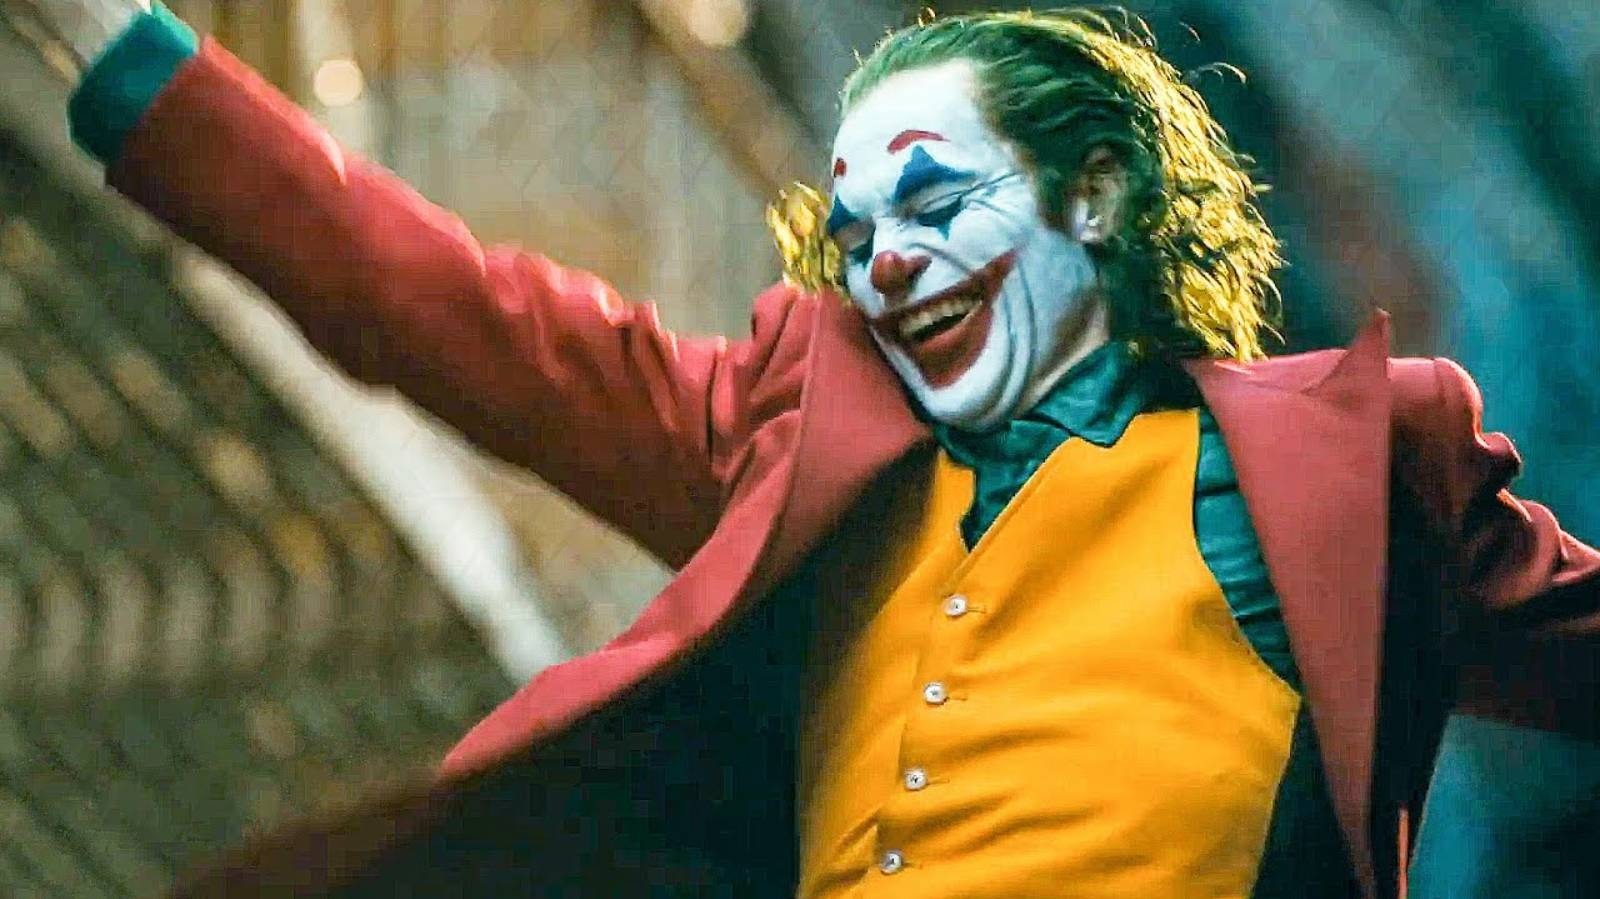 Joker 2 Composer Teases What We Already Suspected About The Sequel